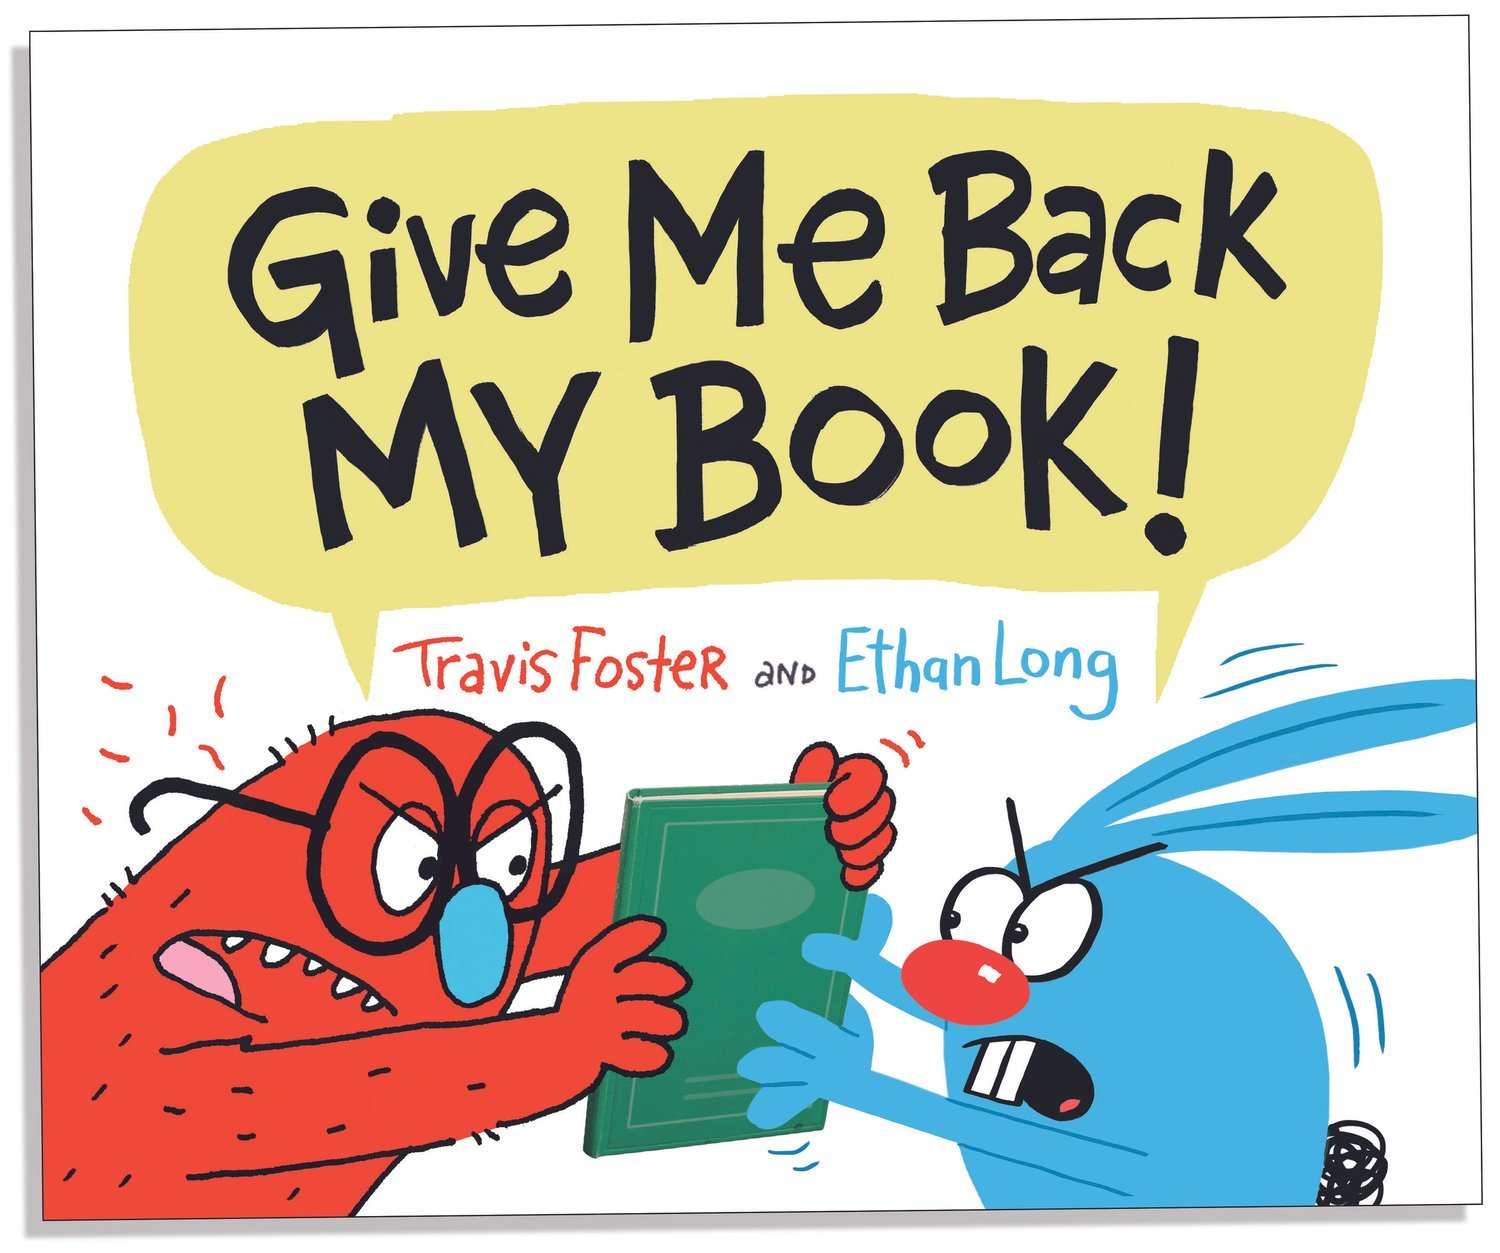 00+GIVE+ME+BACK+MY+BOOK!-final+color.jpg